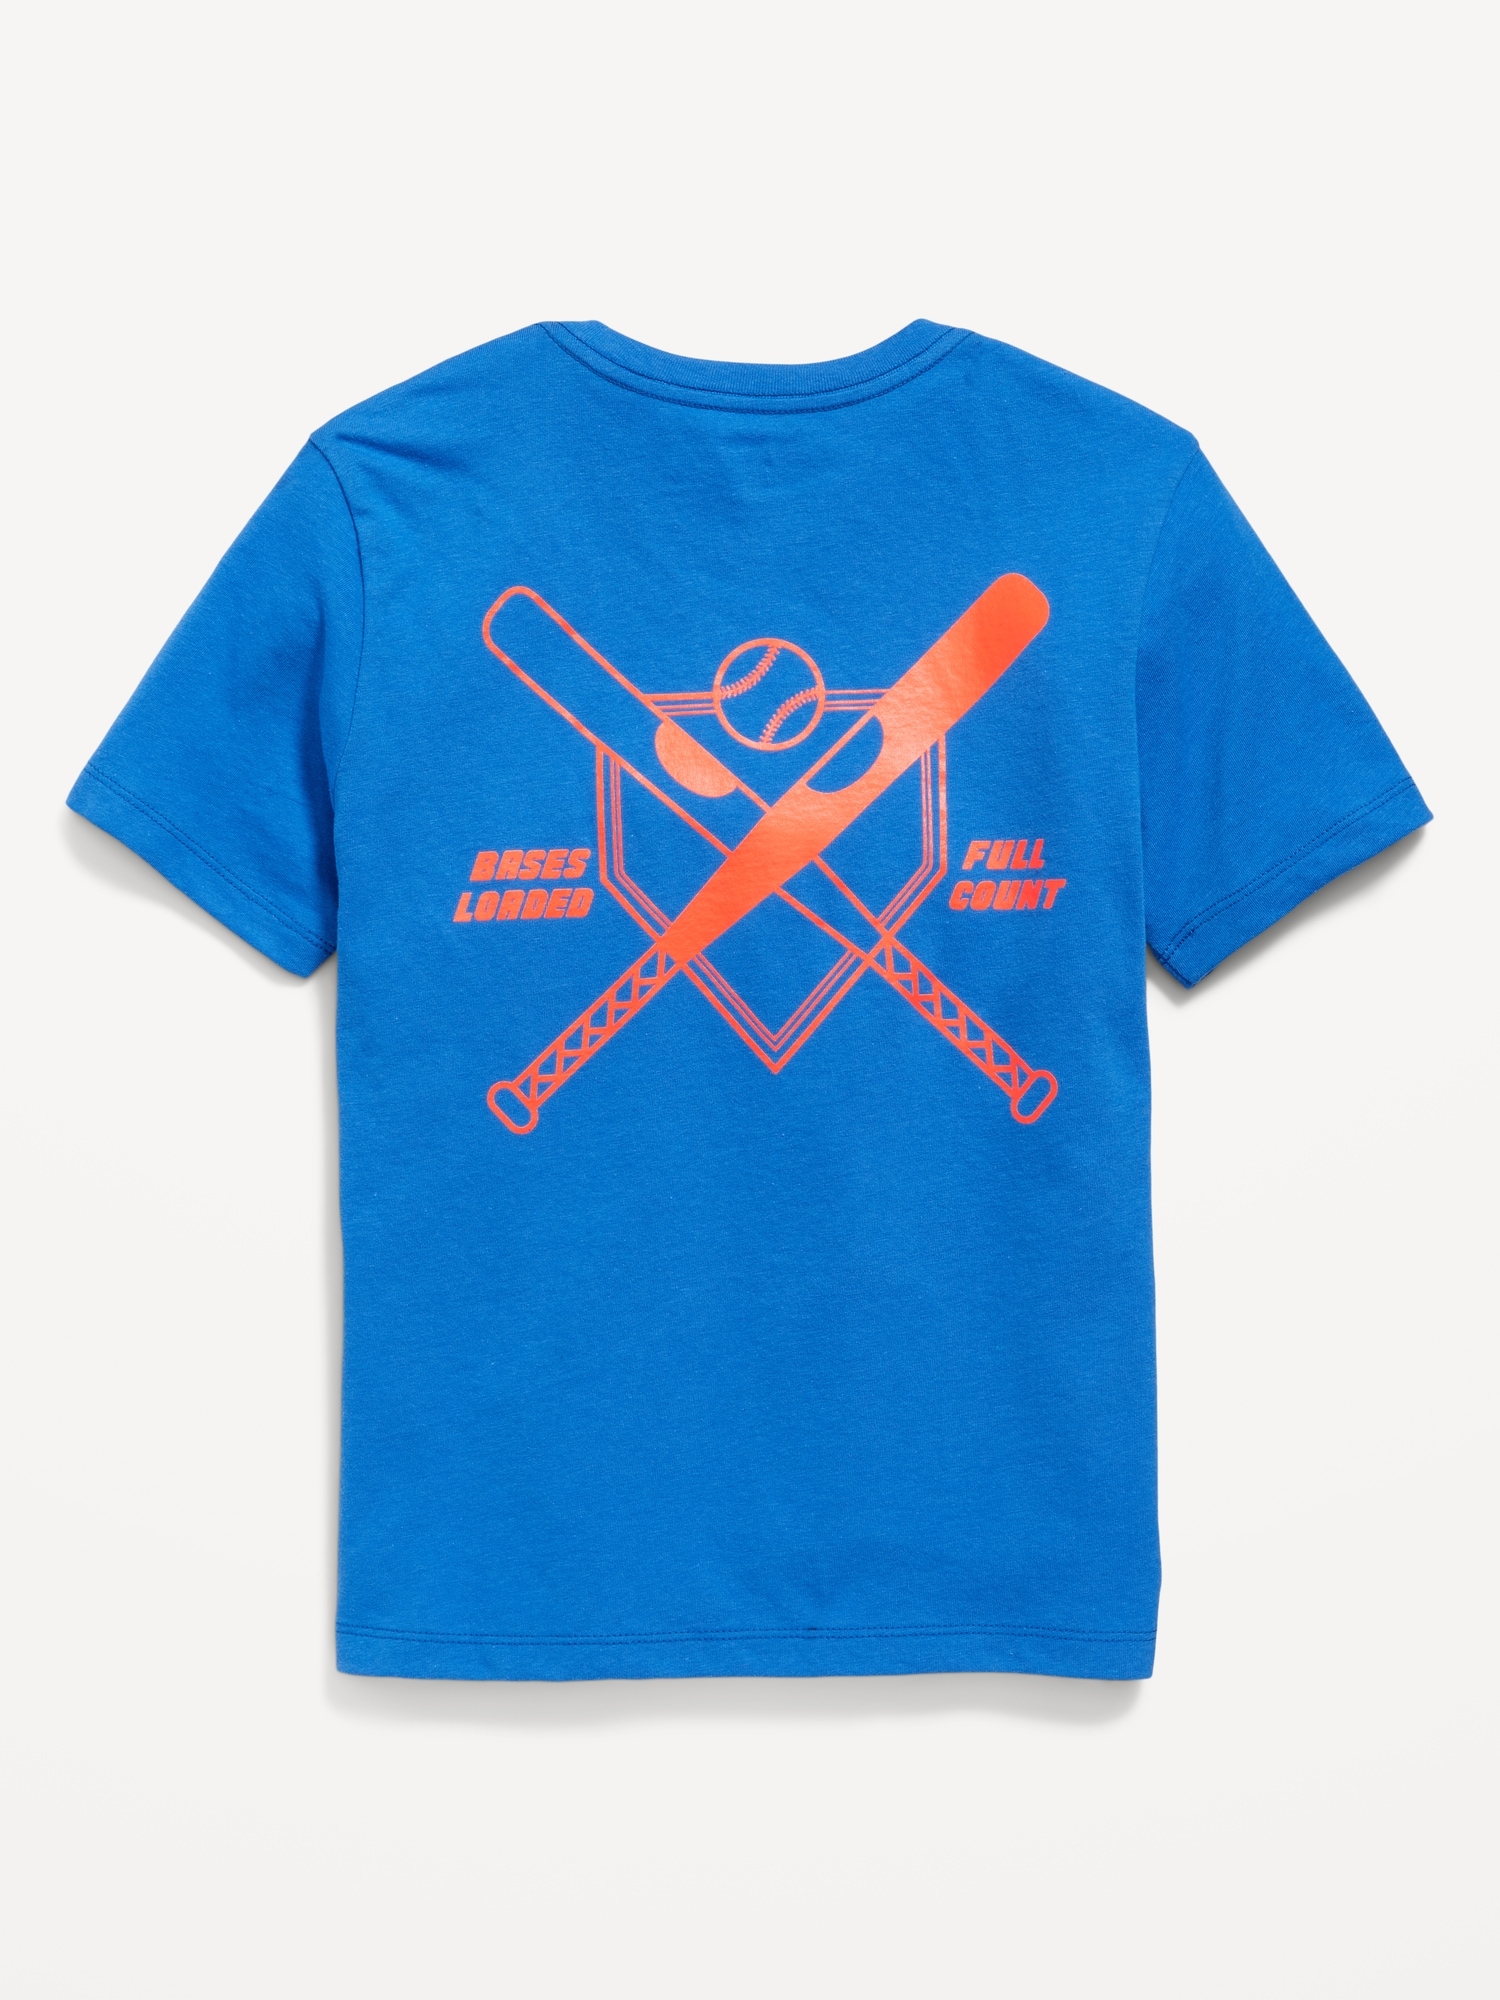 Short Sleeve Graphic T Shirt For Boys Old Navy